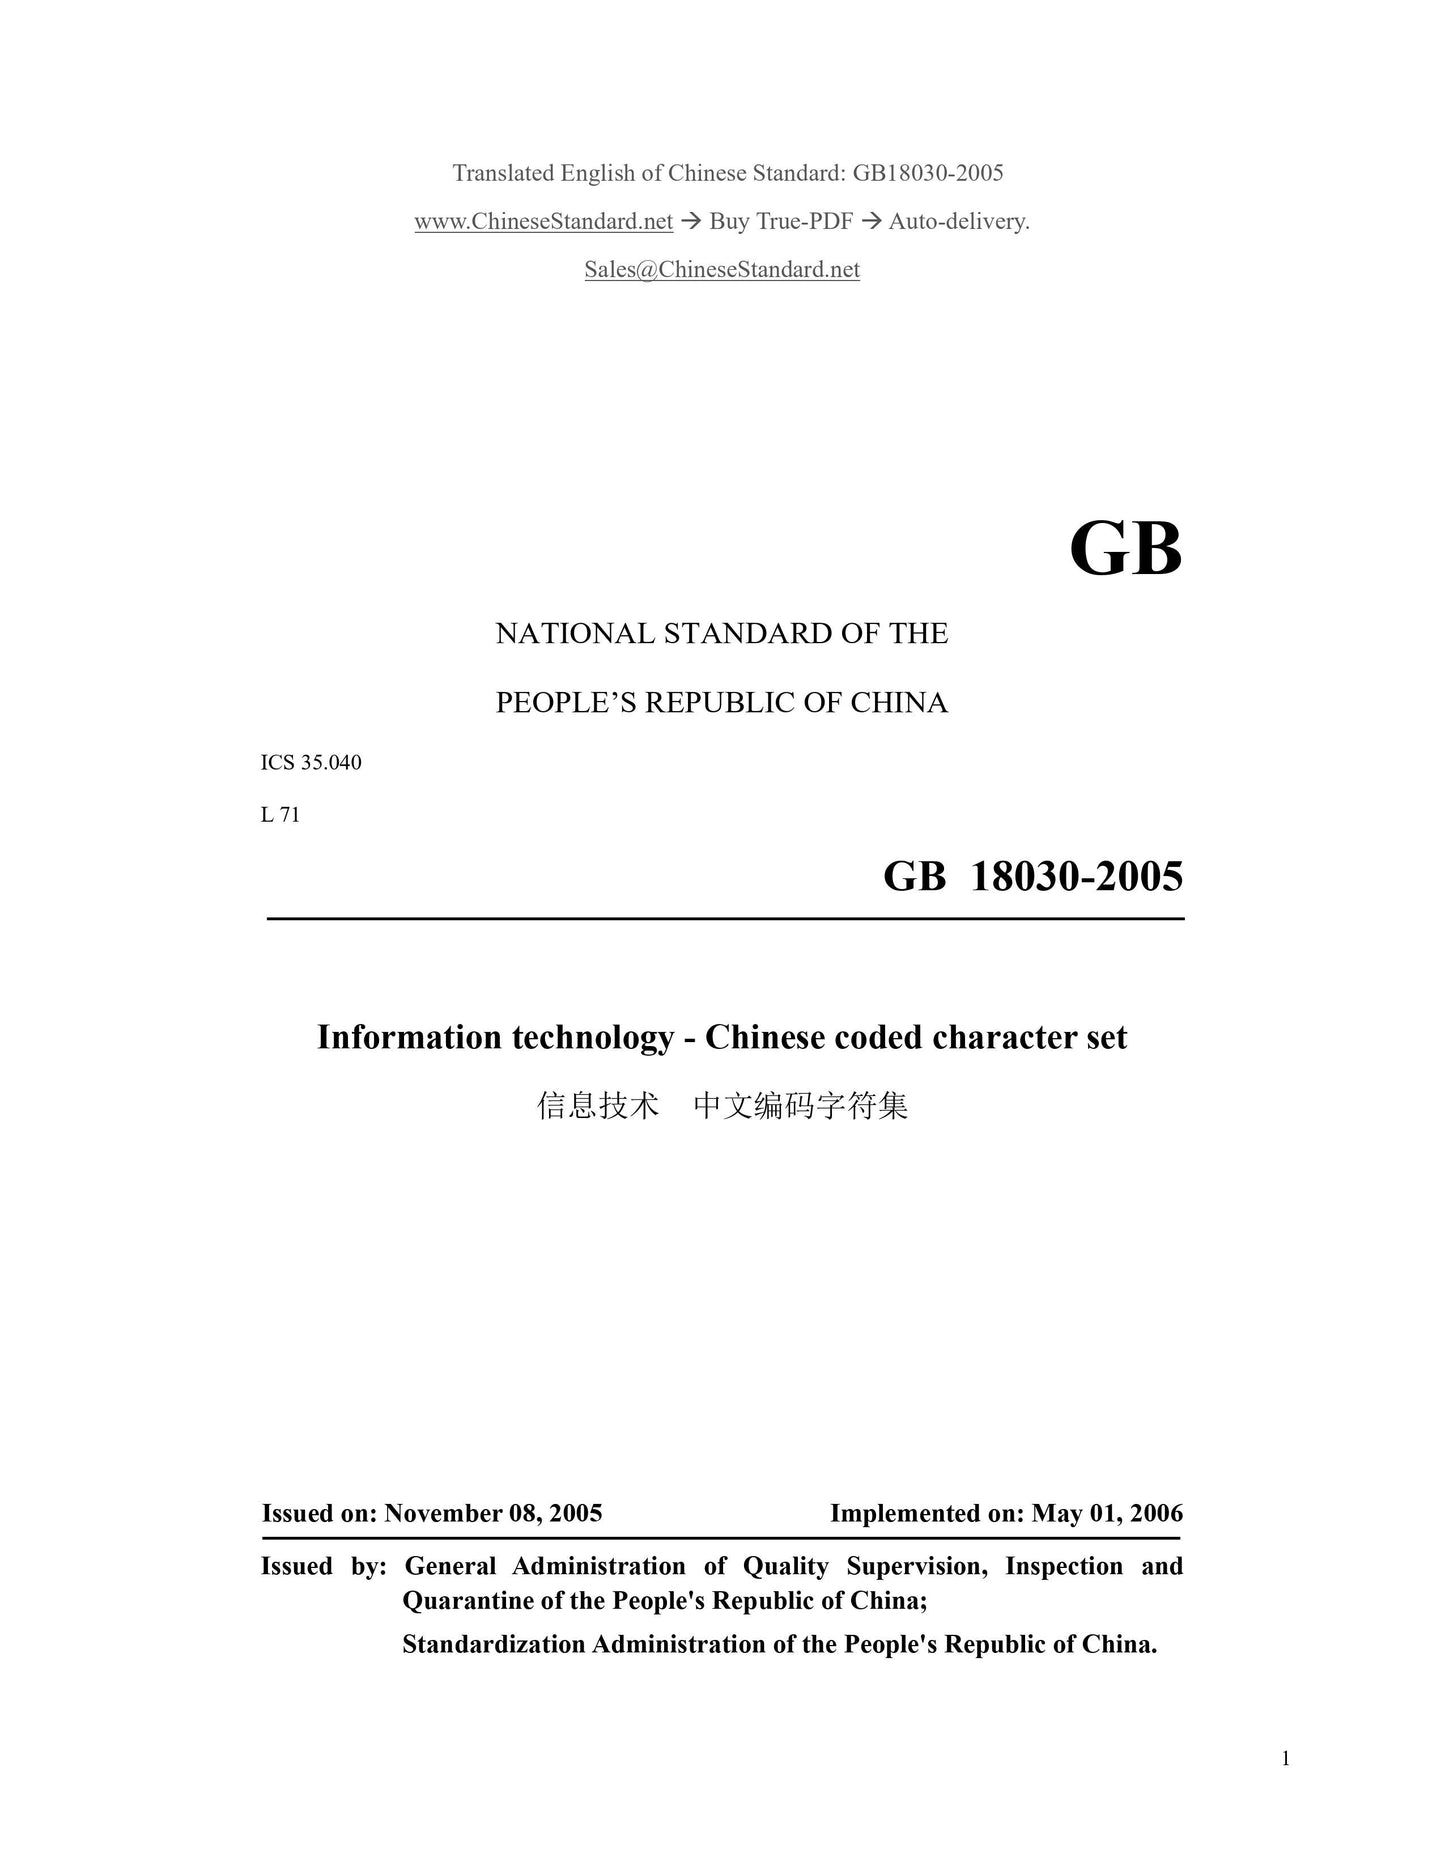 GB 18030-2005 Page 1